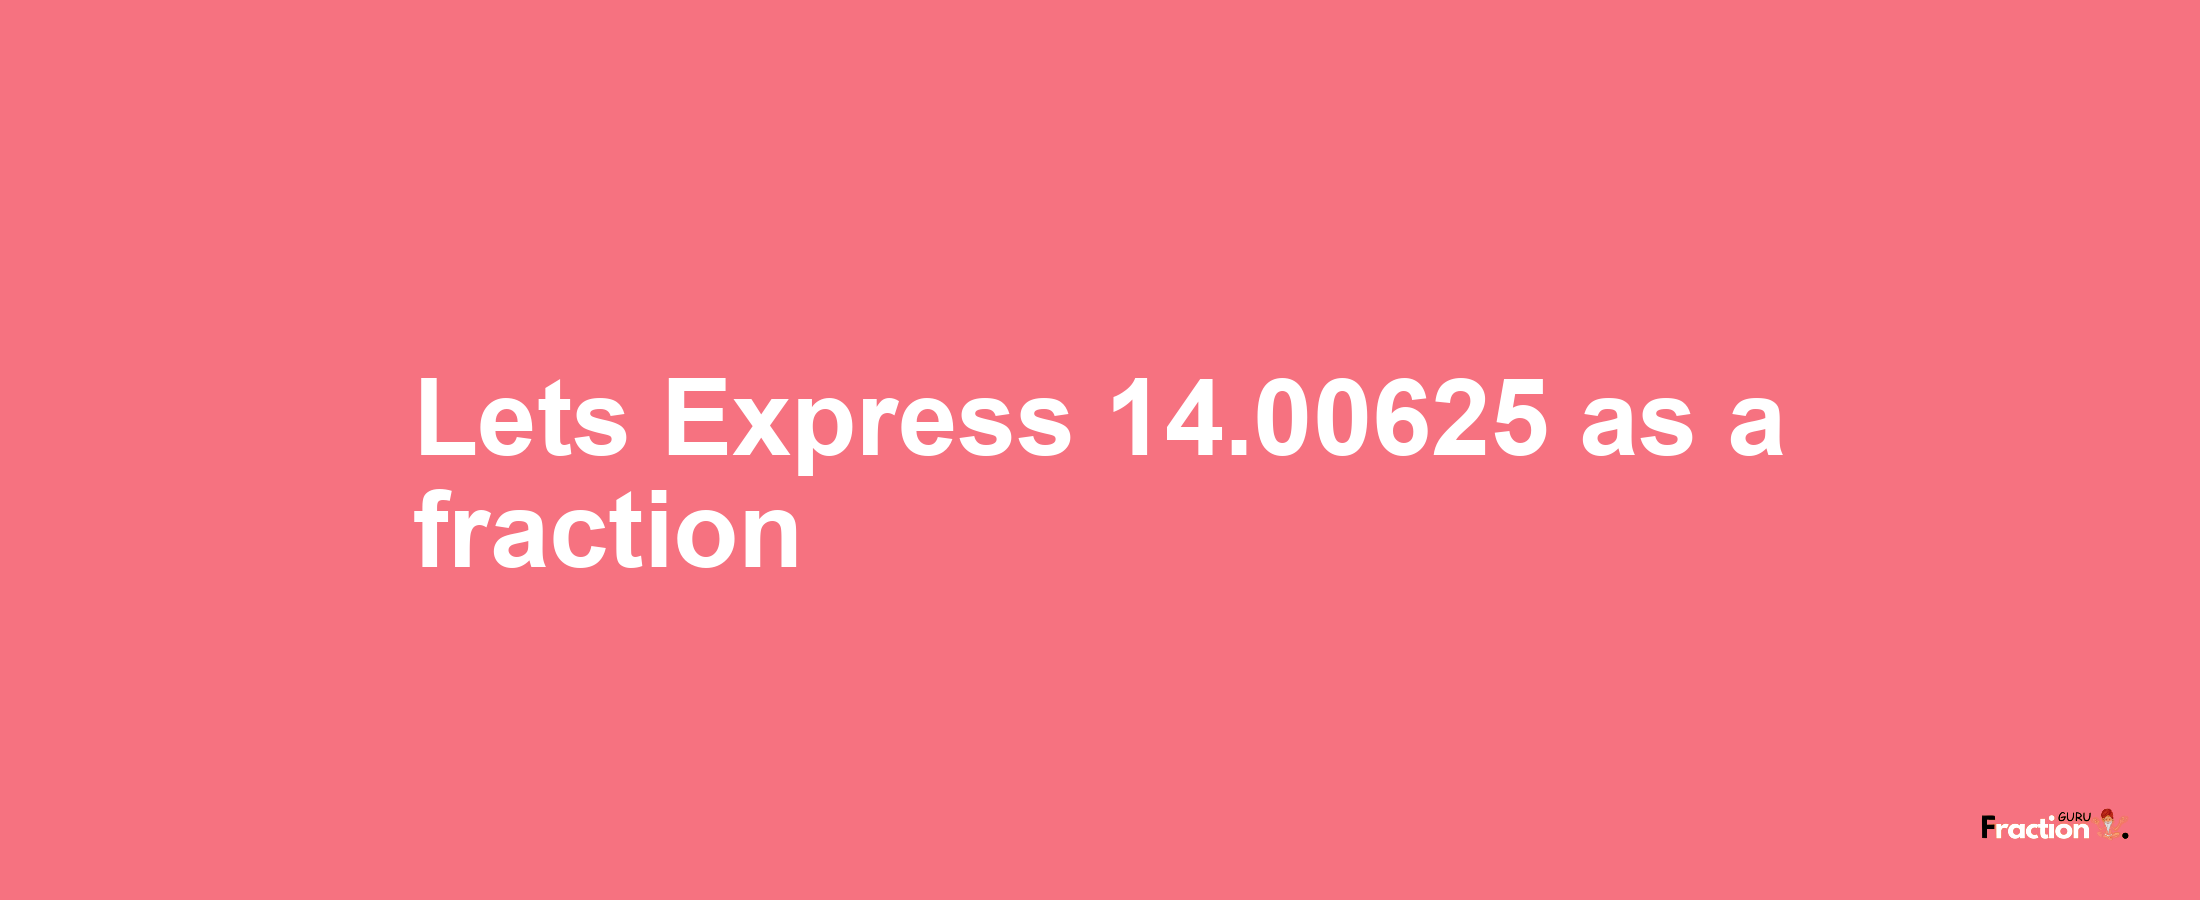 Lets Express 14.00625 as afraction